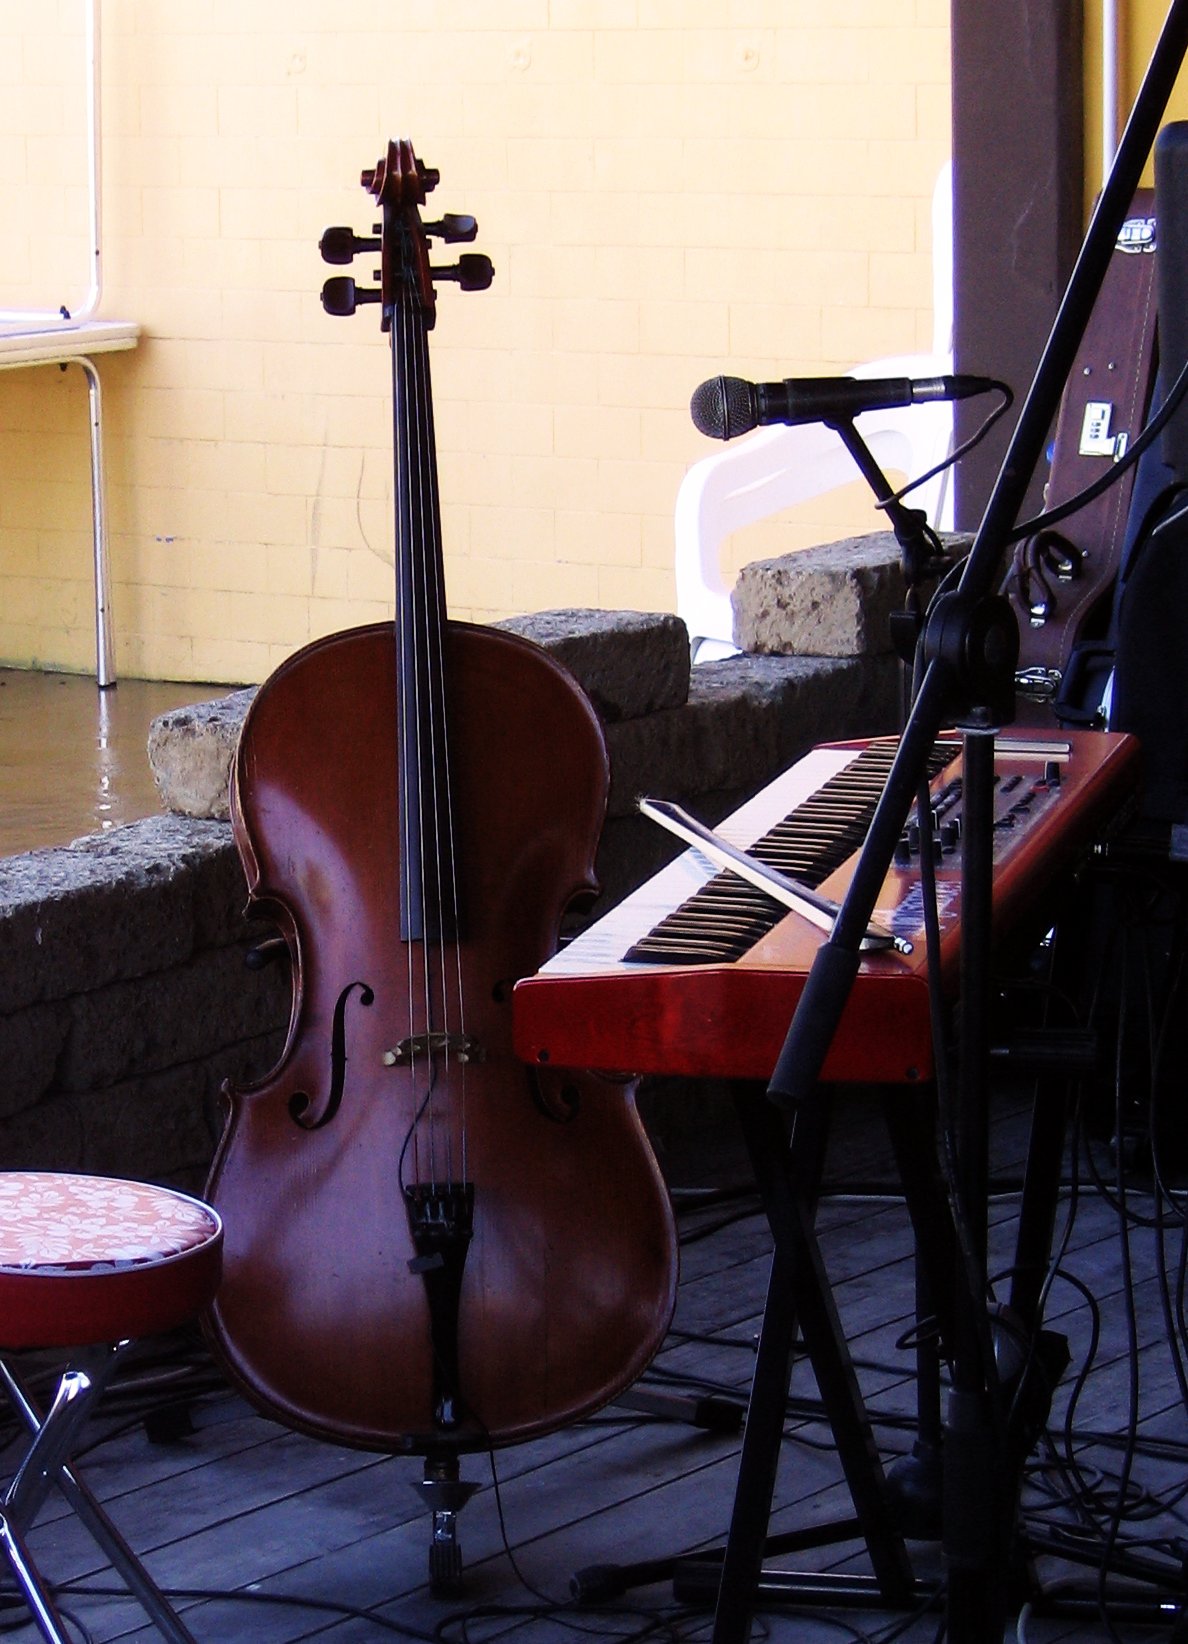 the cello is standing upright beside the piano